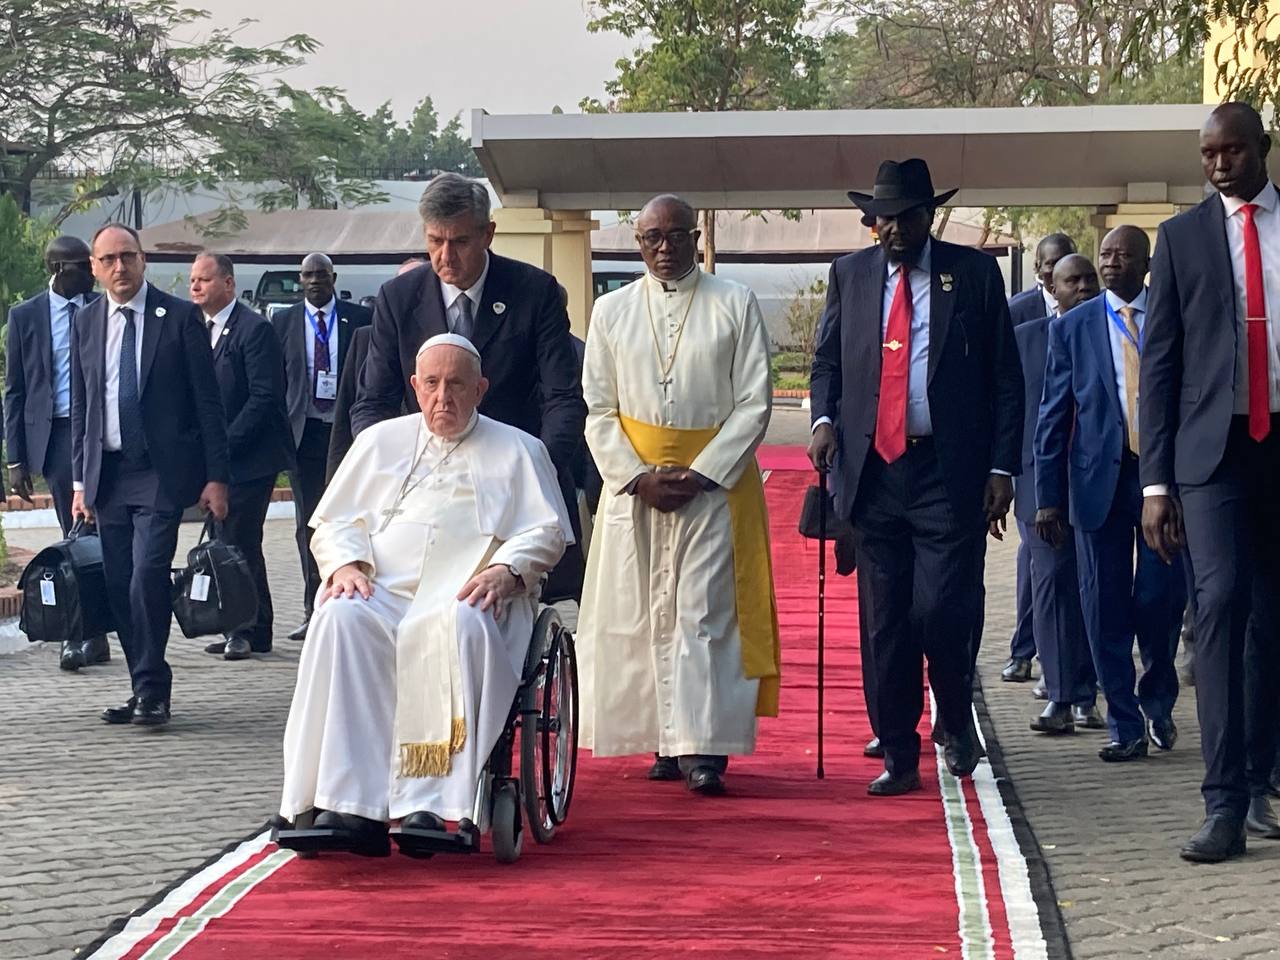 In blunt opening salvo, Pope tells South Sudan leaders to get serious about peace